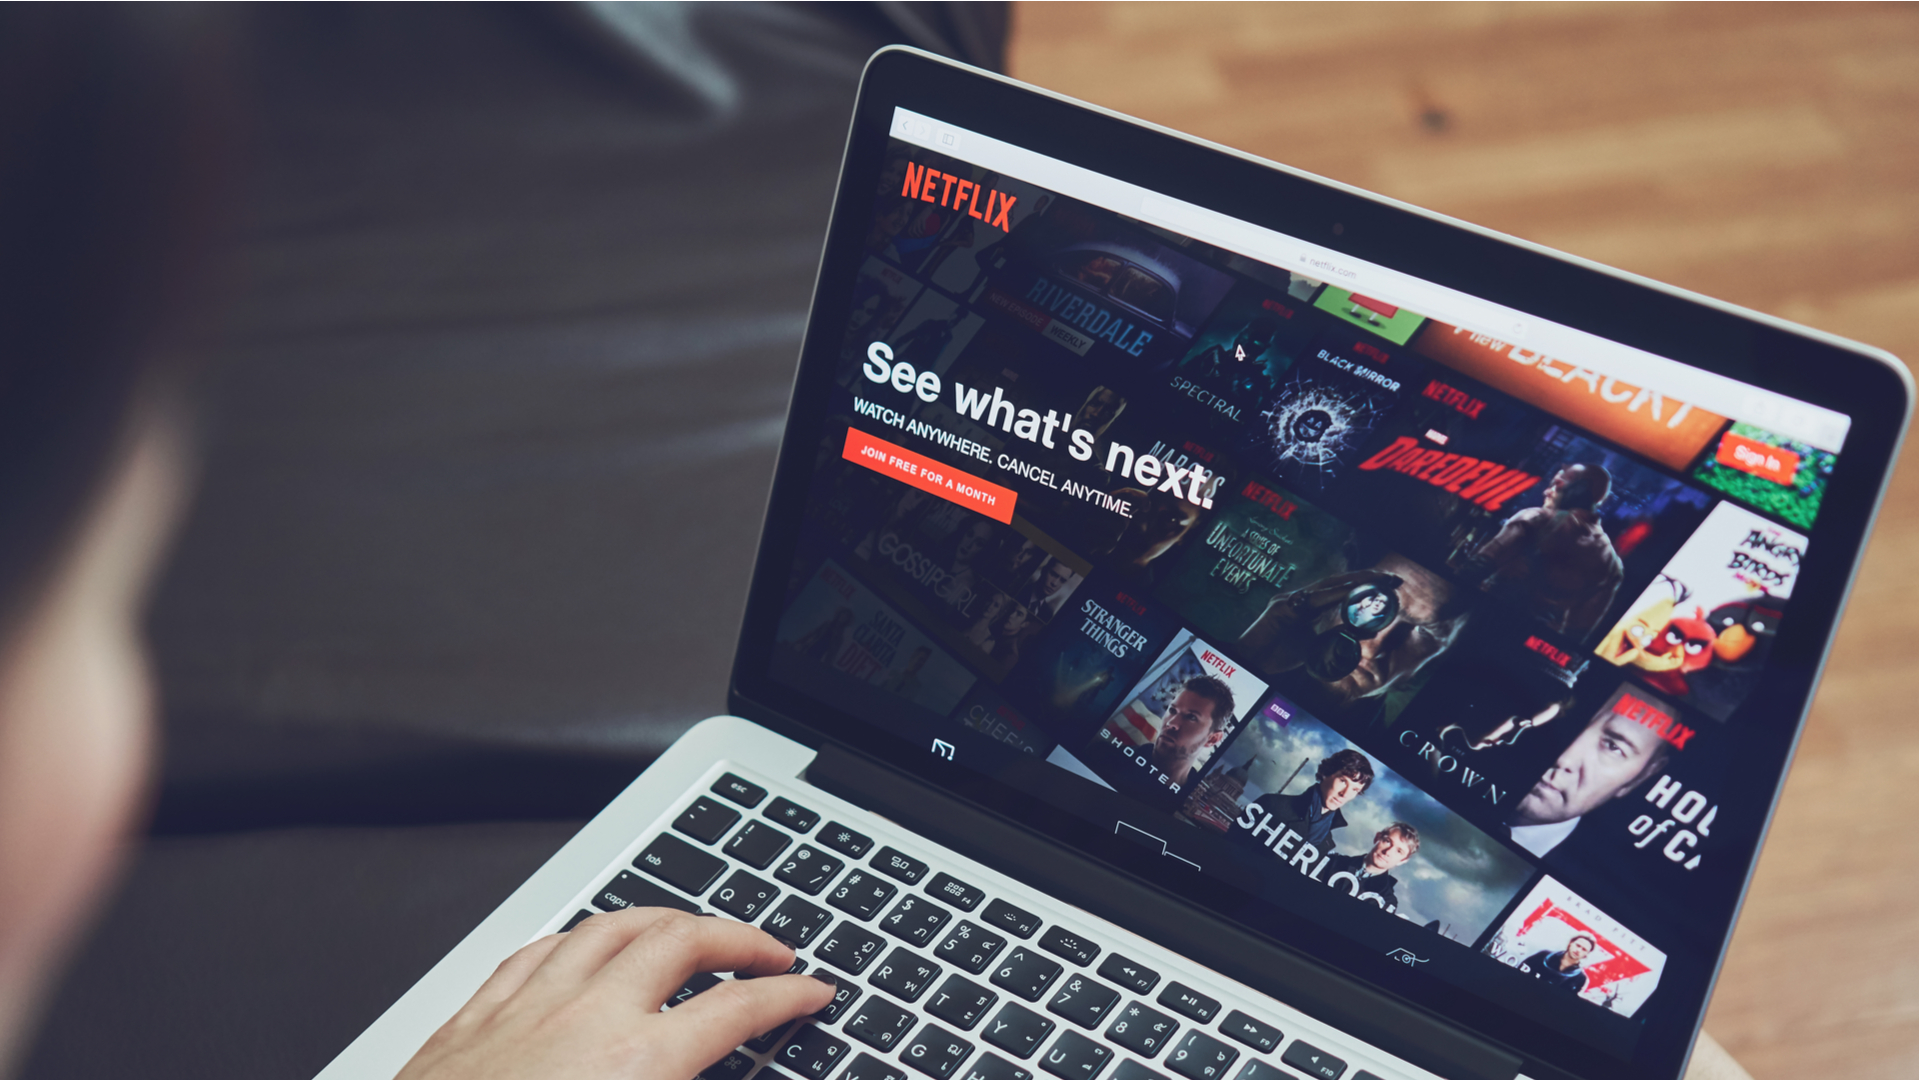 Dead Netflix accounts reactivated by hackers post thumbnail image